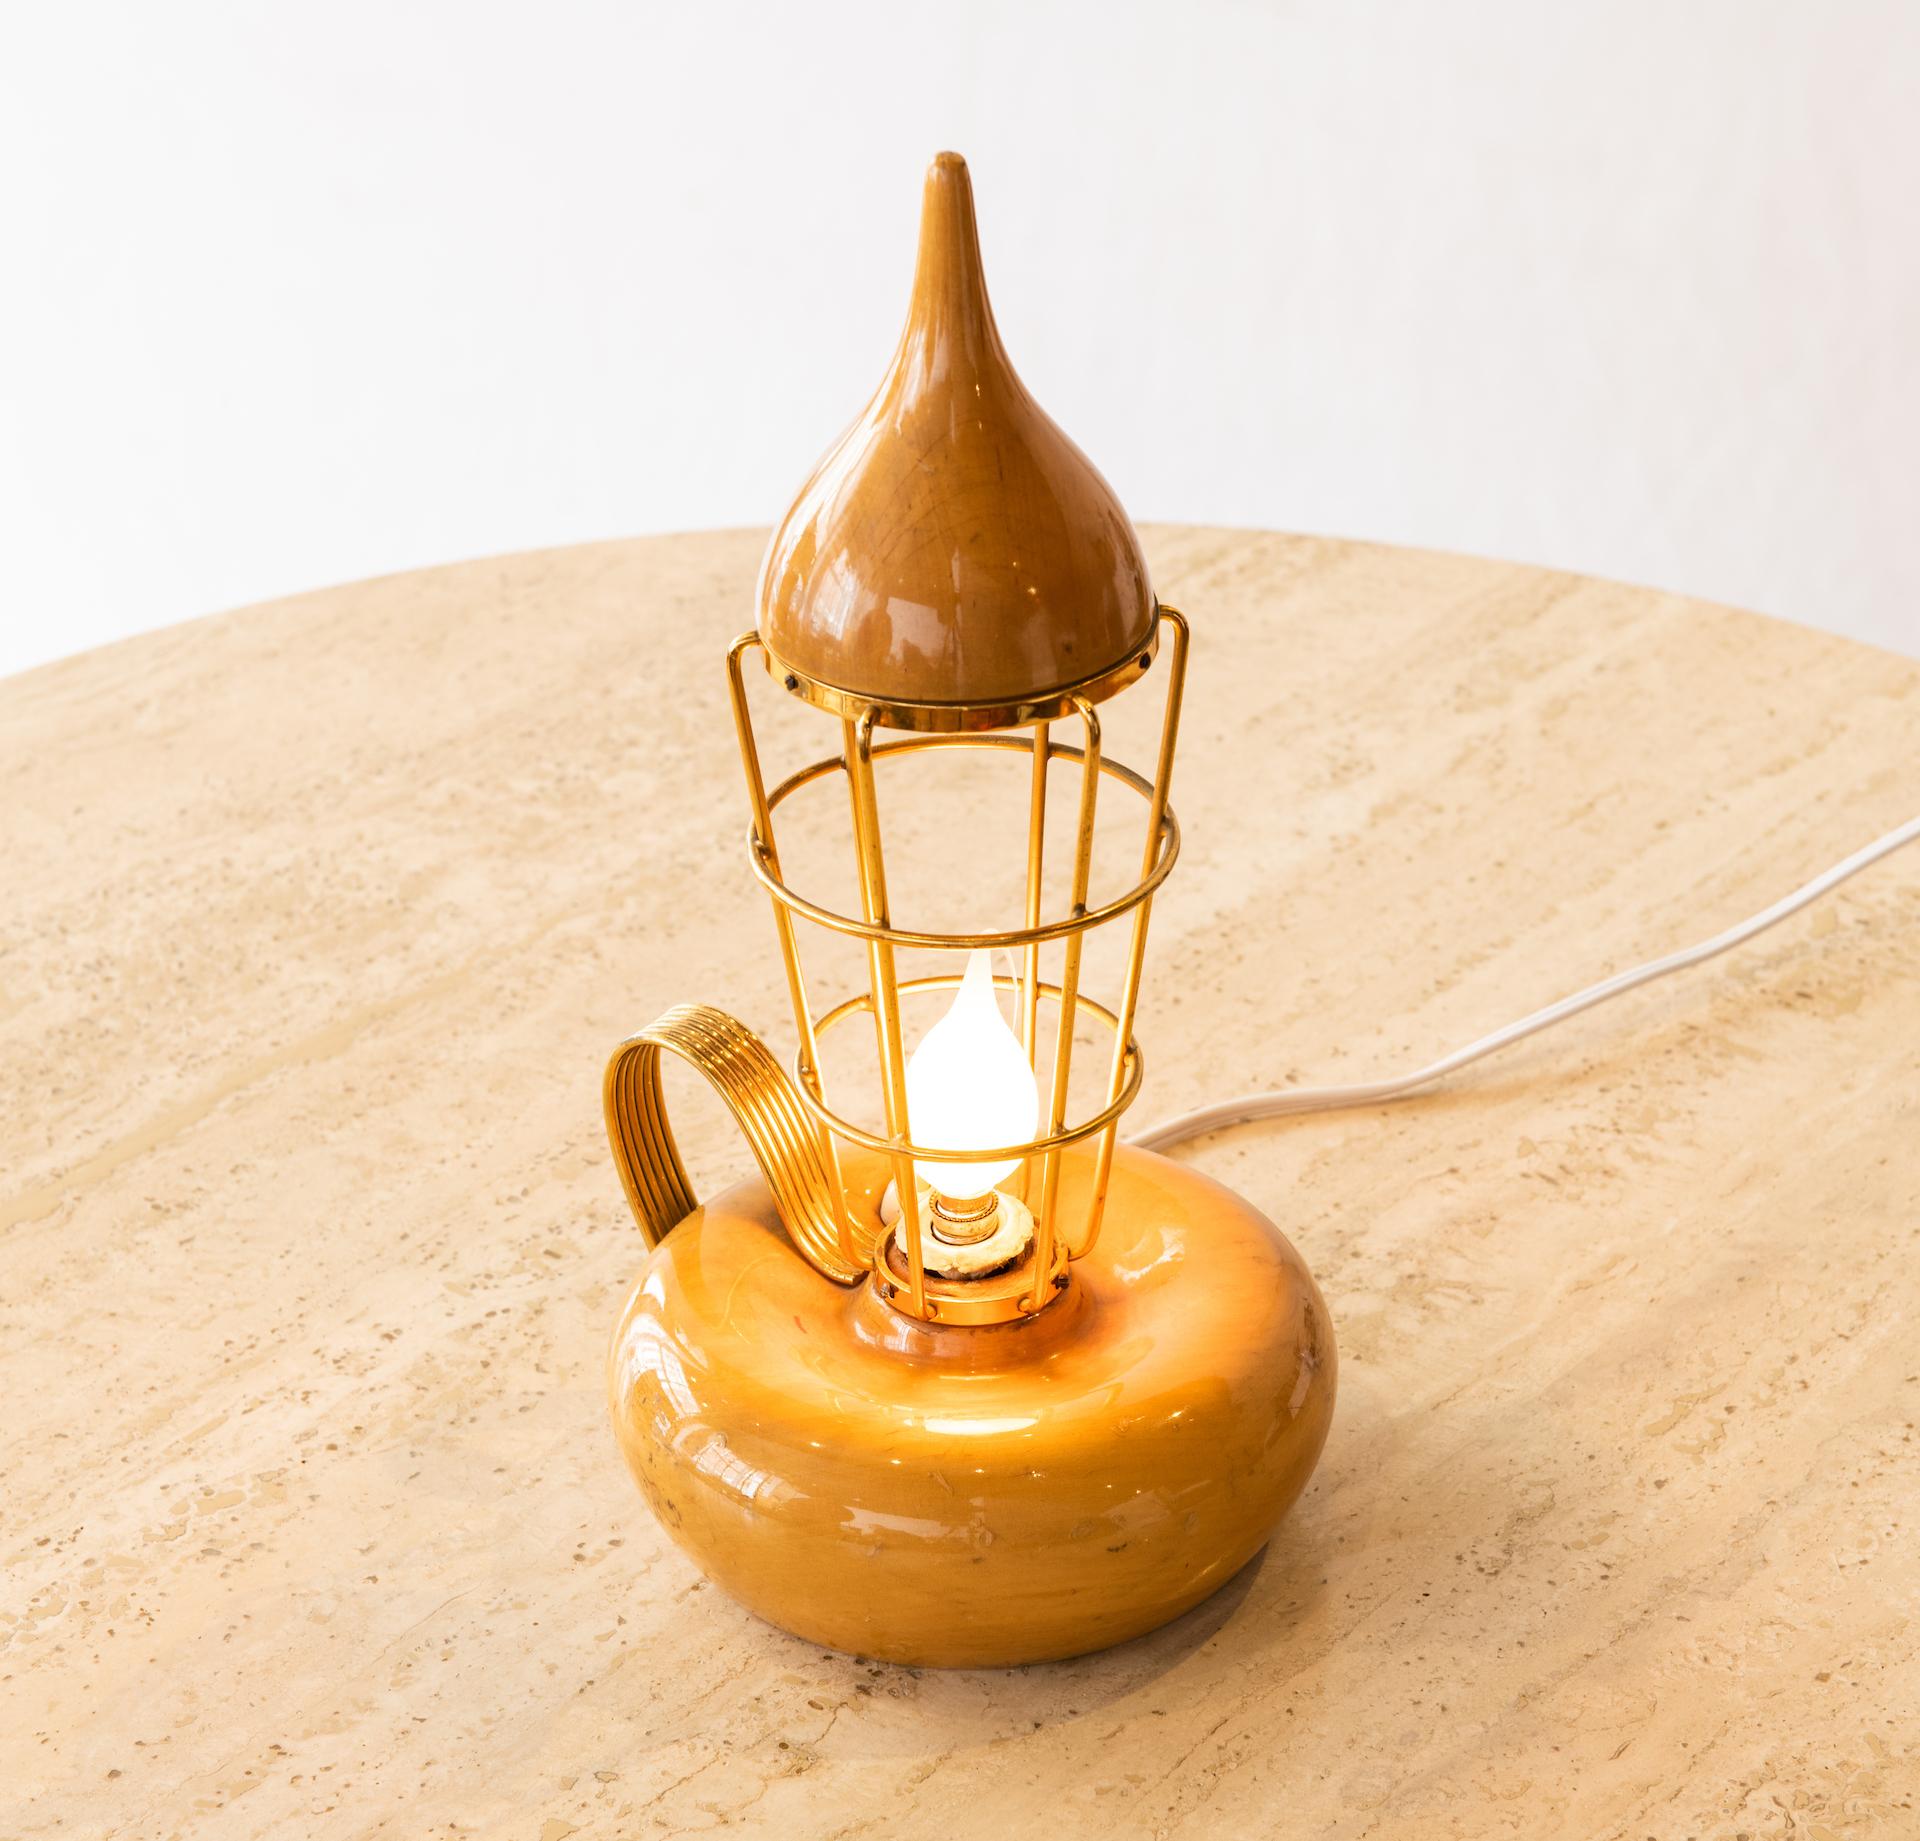 Mid-Century Modern turned burl olive wood lantern table lamp with brass bulb cage and handle. In original condition with original foil label.

Born in 1909, Italian designer-maker Aldo Tura established his furniture production house in Lombardy in